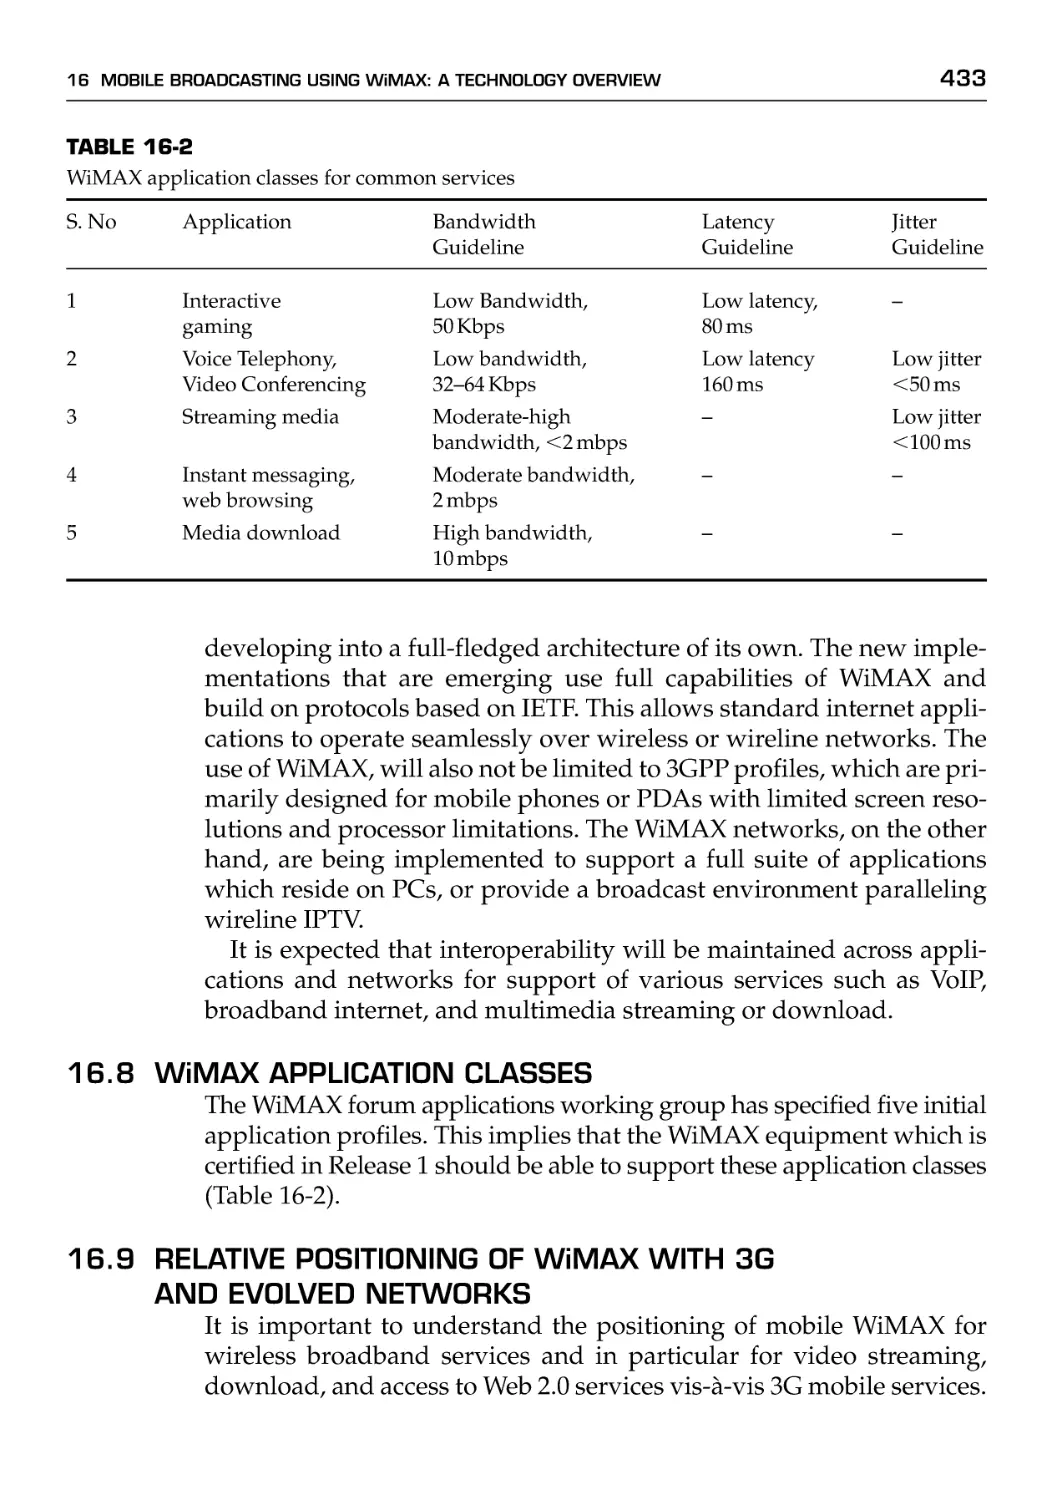 16.8 WiMAX Application Classes
16.9 Relative Positioning of WiMAX with 3G and Evolved Networks